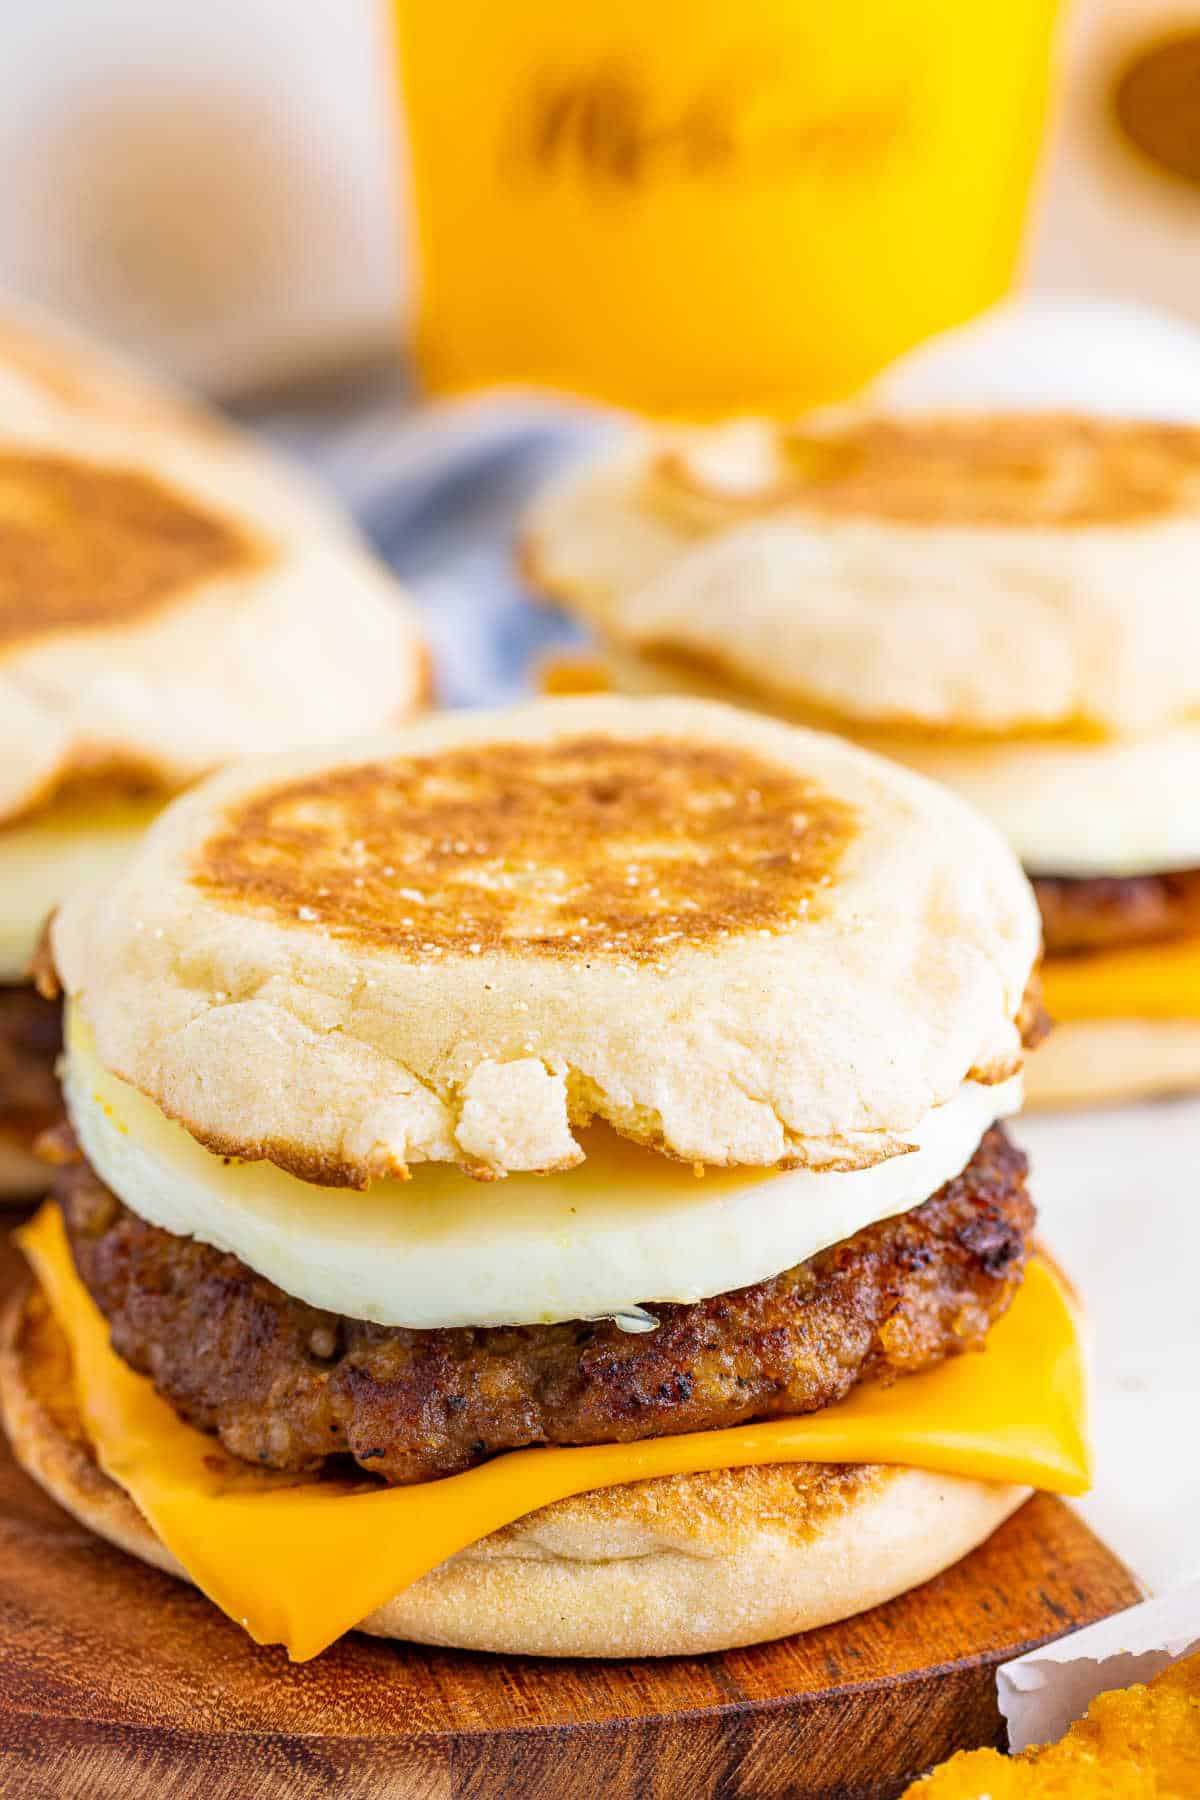 A copycat McDonad's Sausage Egg McMuffins on a wooden surface.